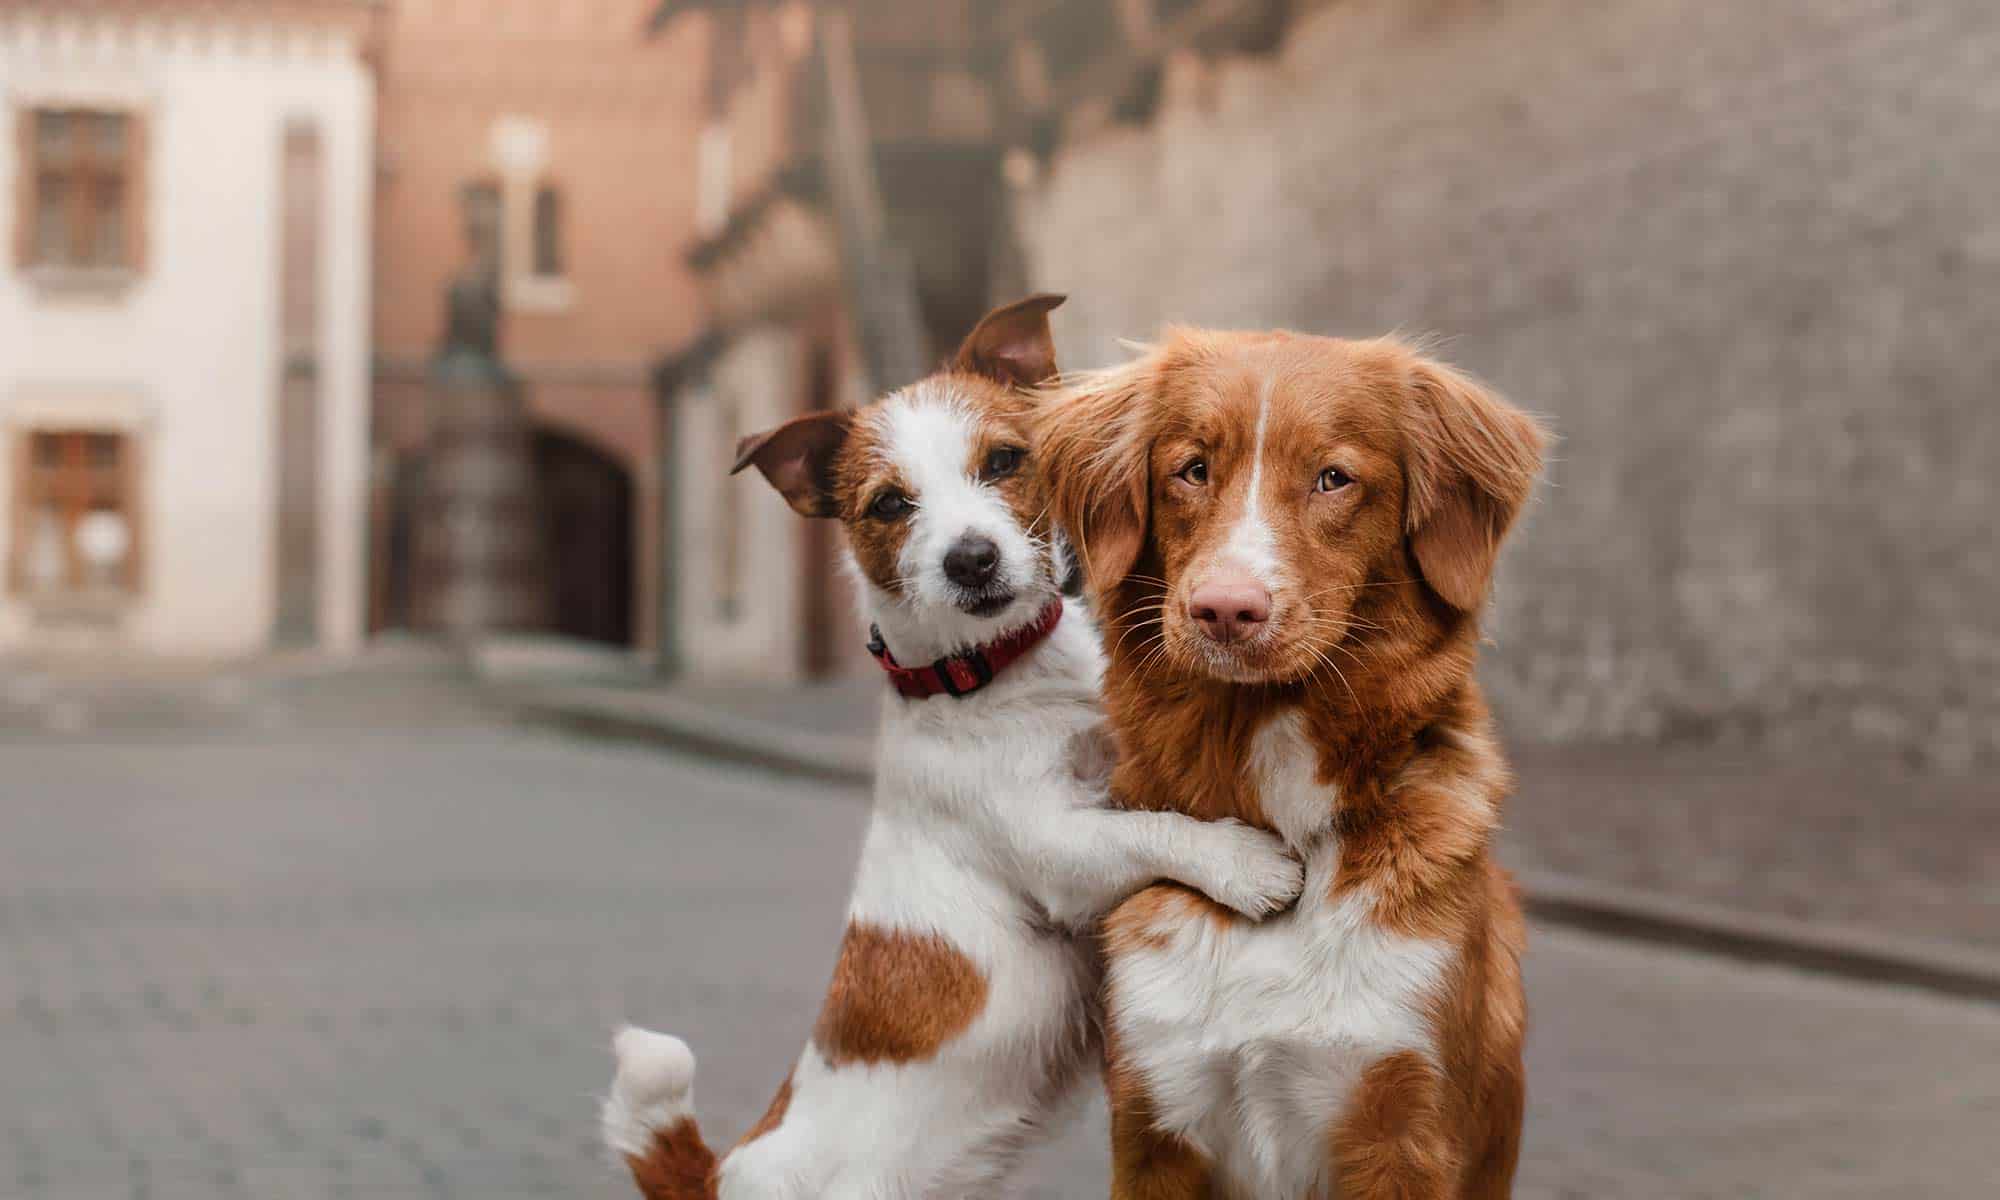 A dog hugging another dog